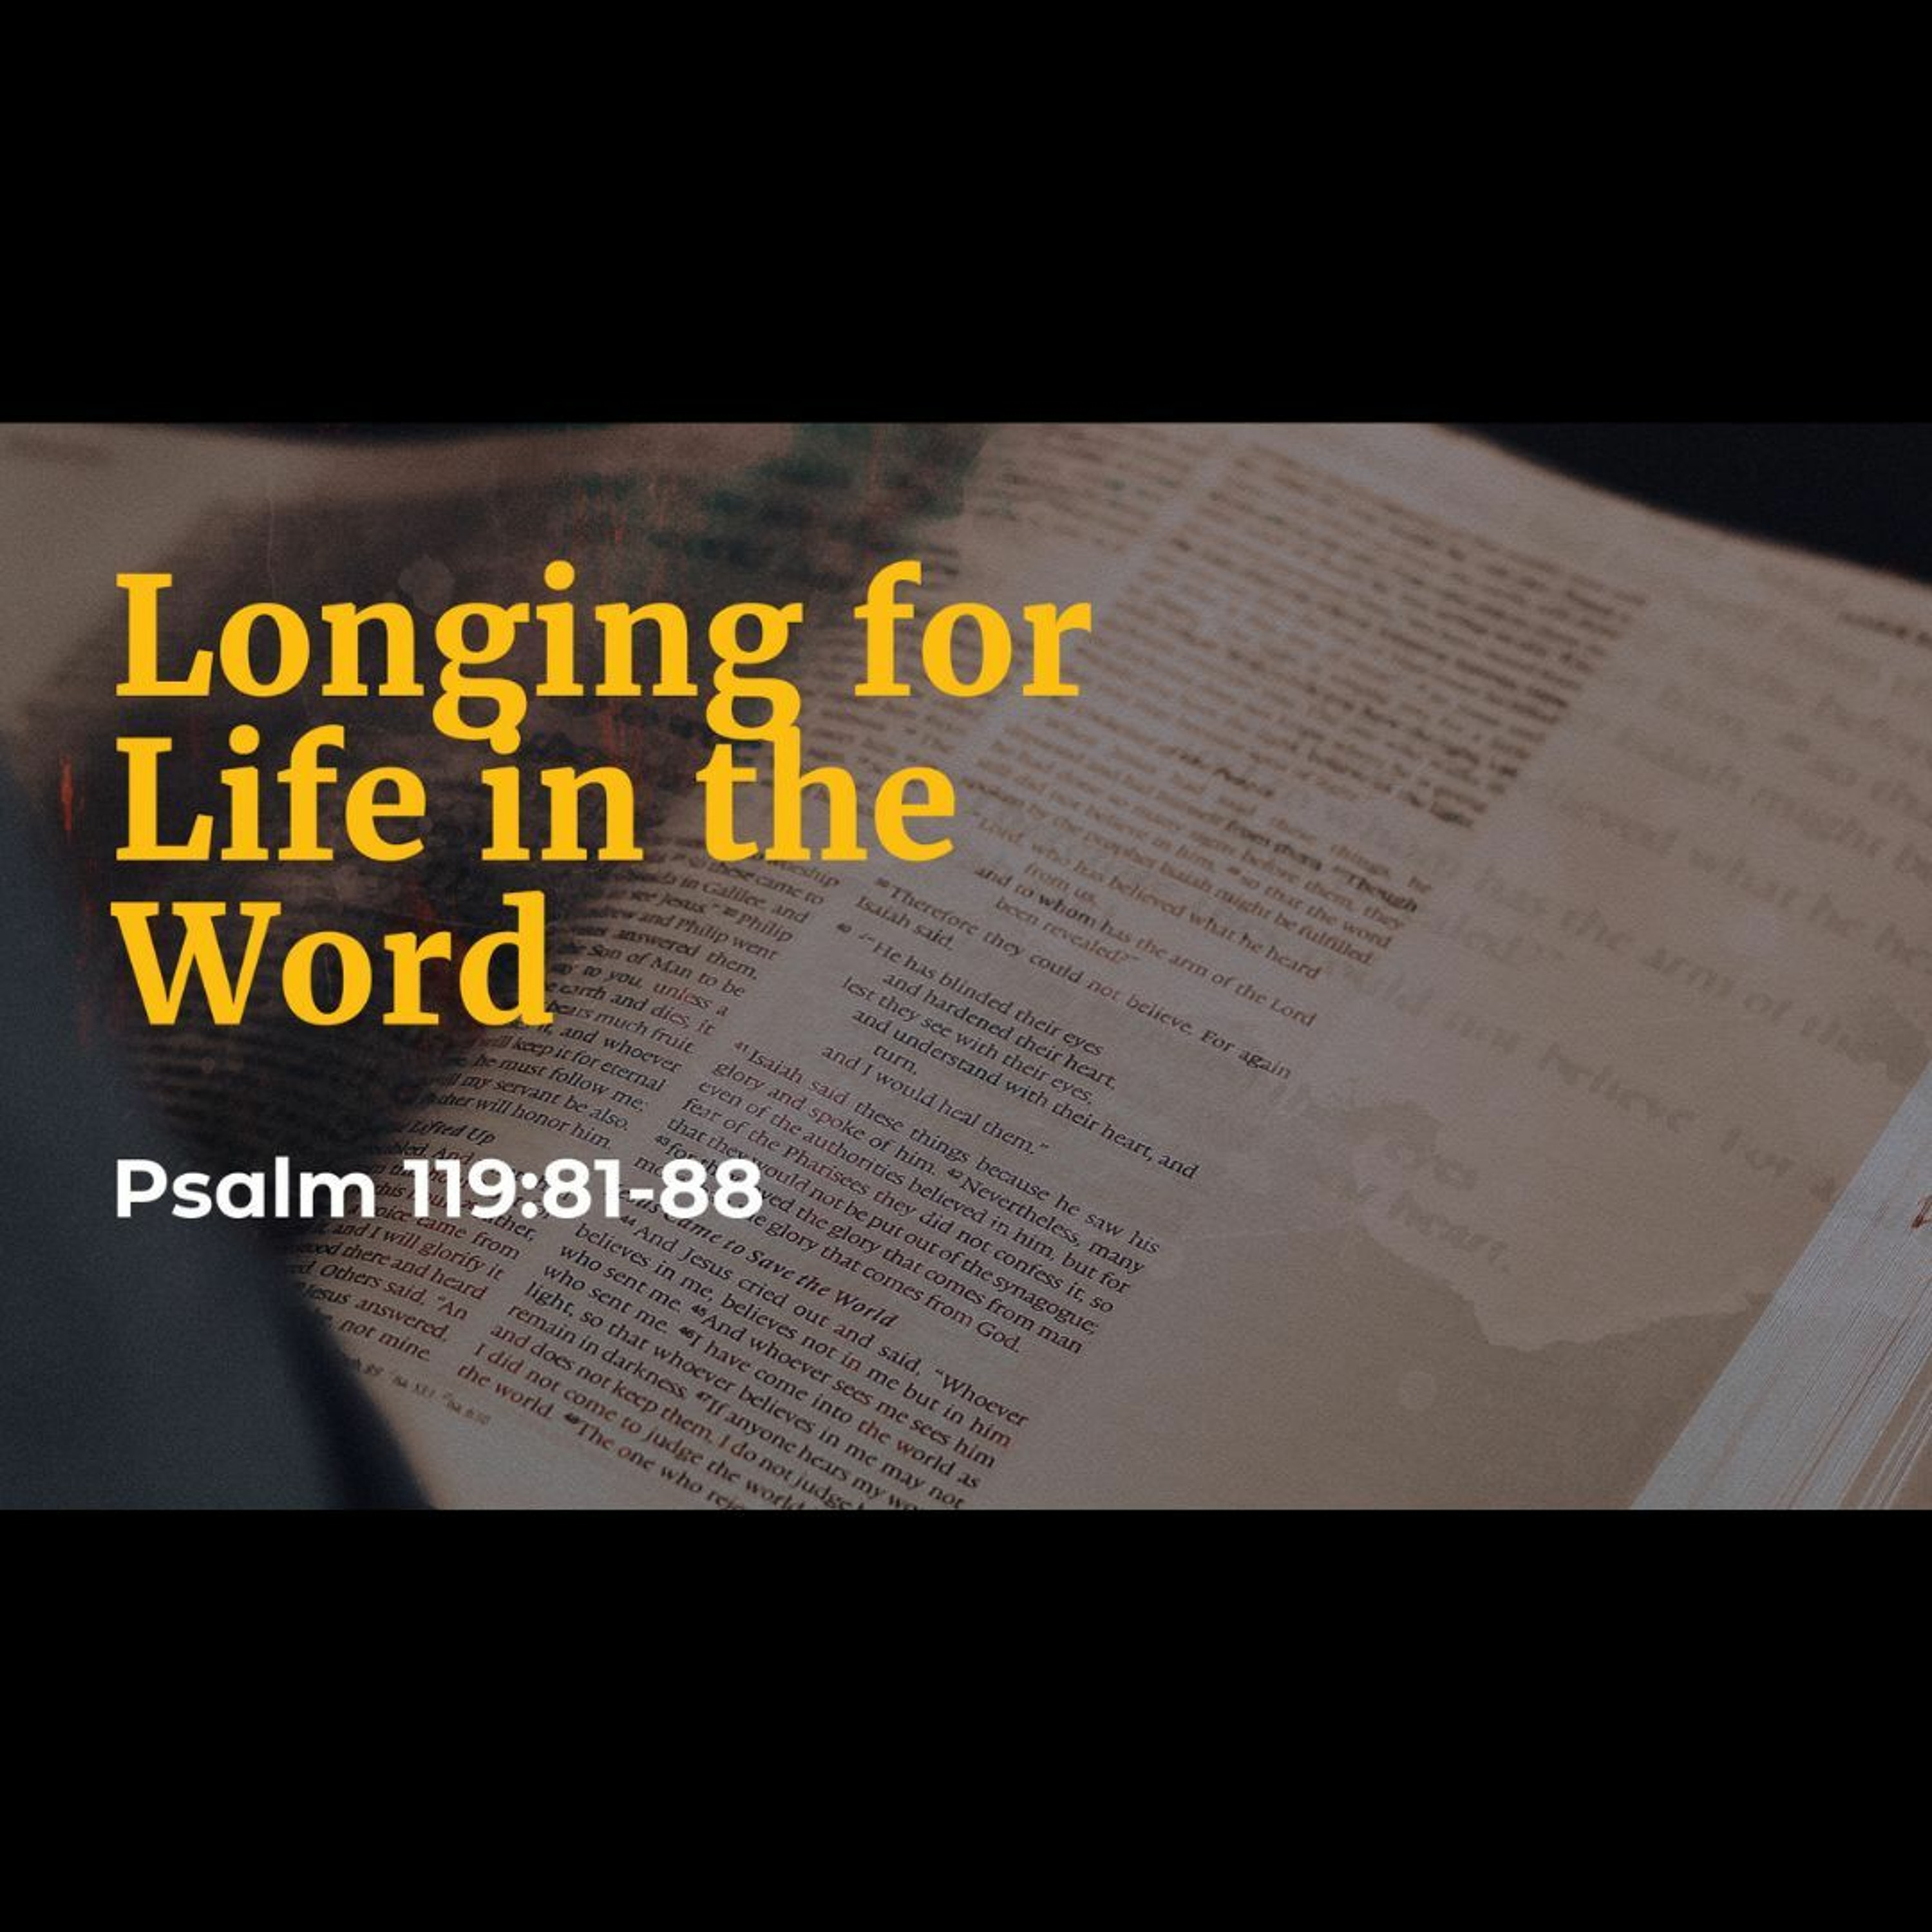 Longing For Life in the Word (Psalm 119:81-88)